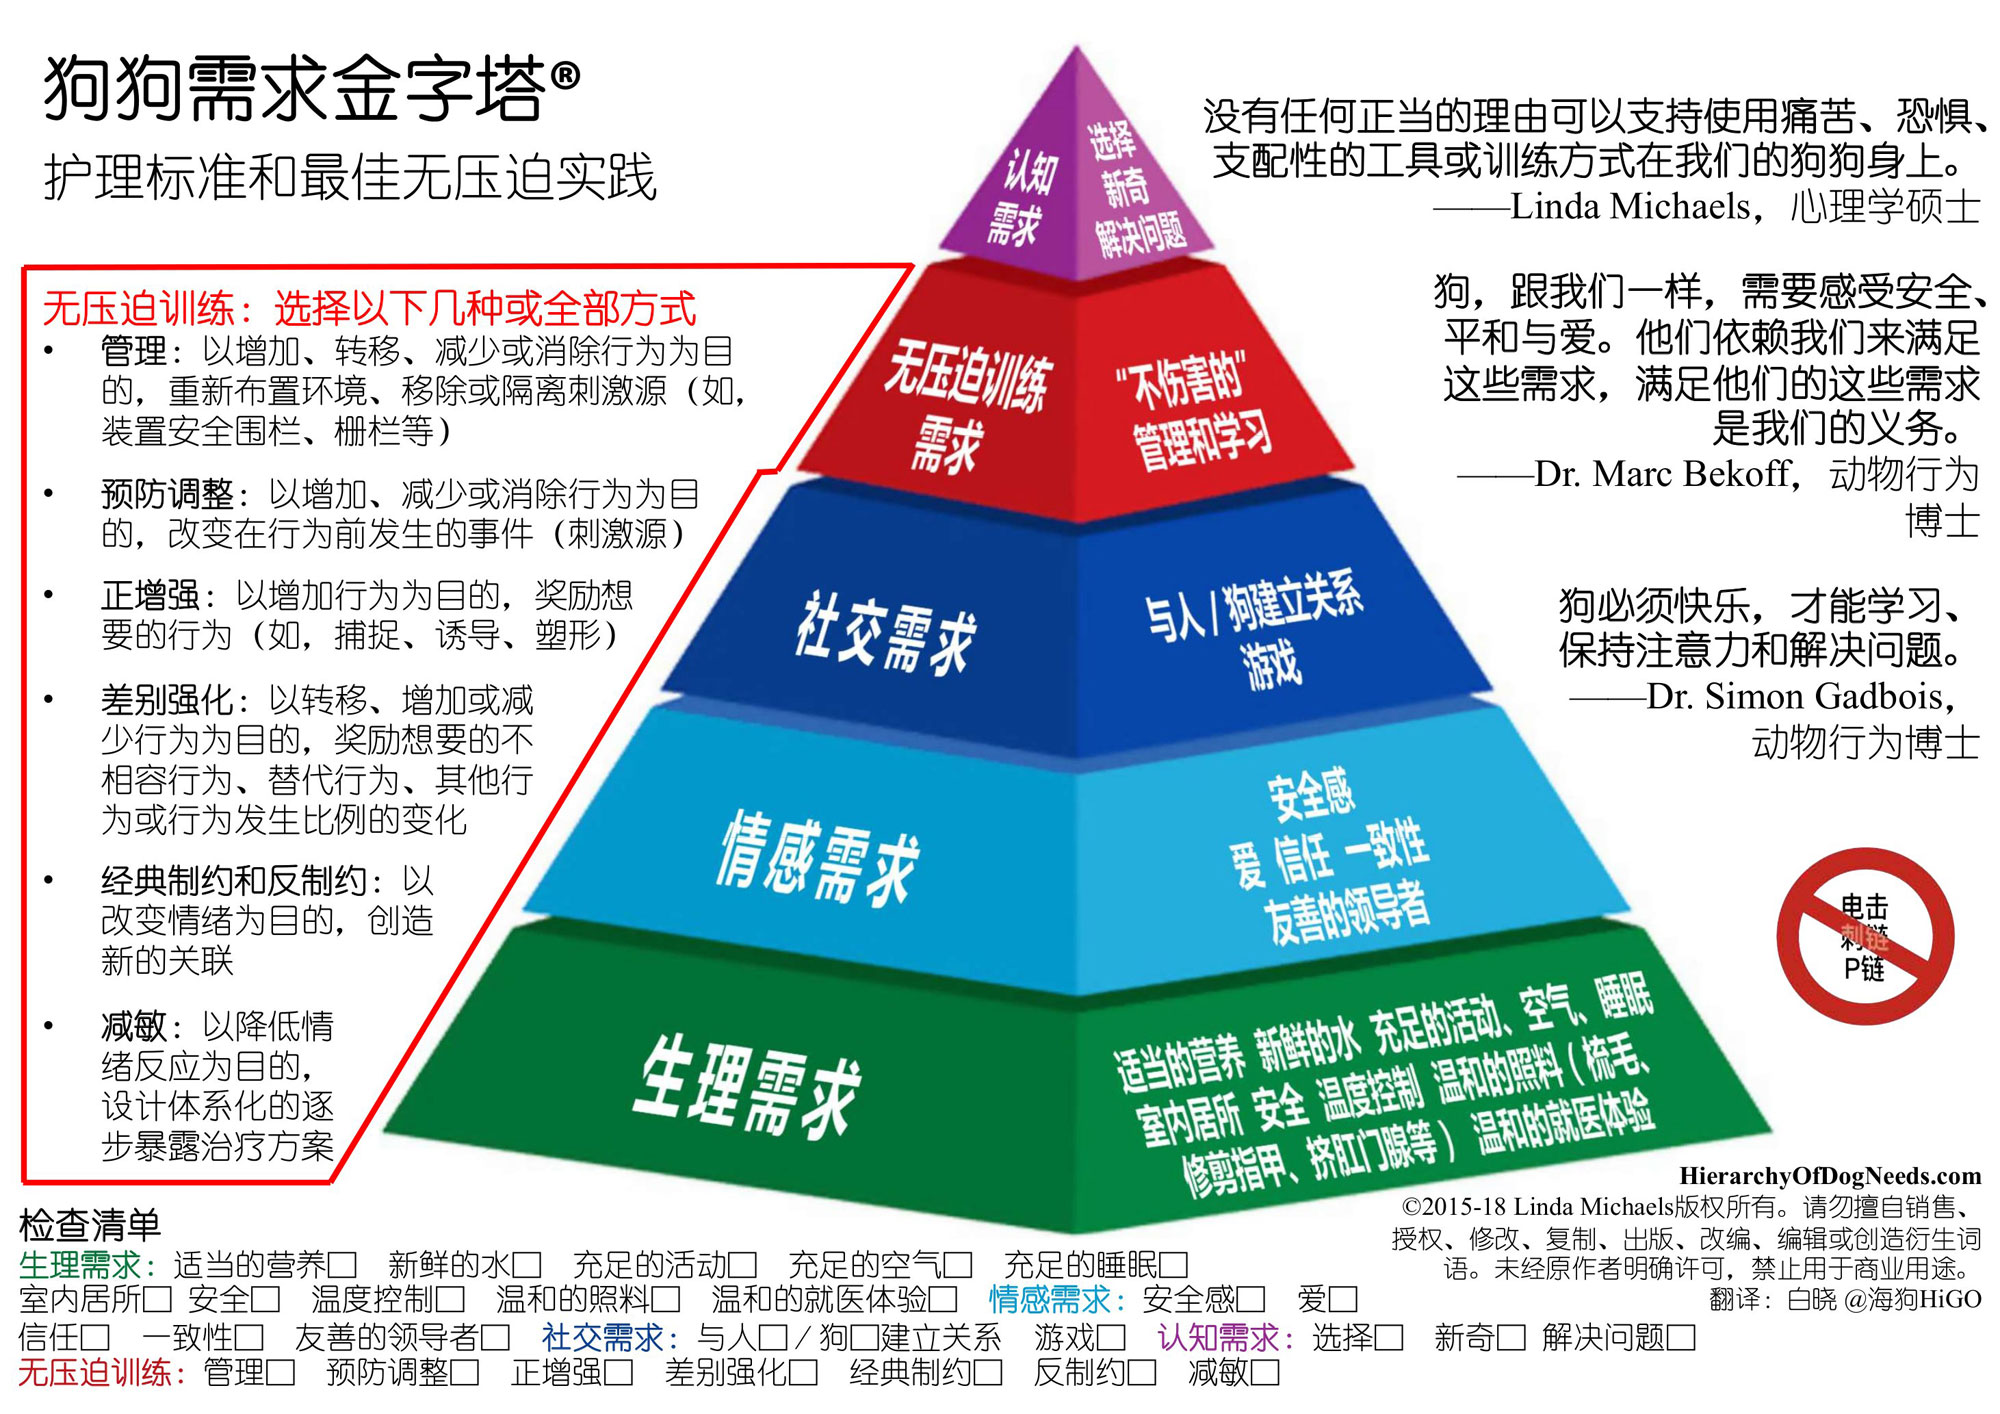 Chinese Translation of Dr. Marc Bekoff’s Hierarchy of Dog Needs Interview